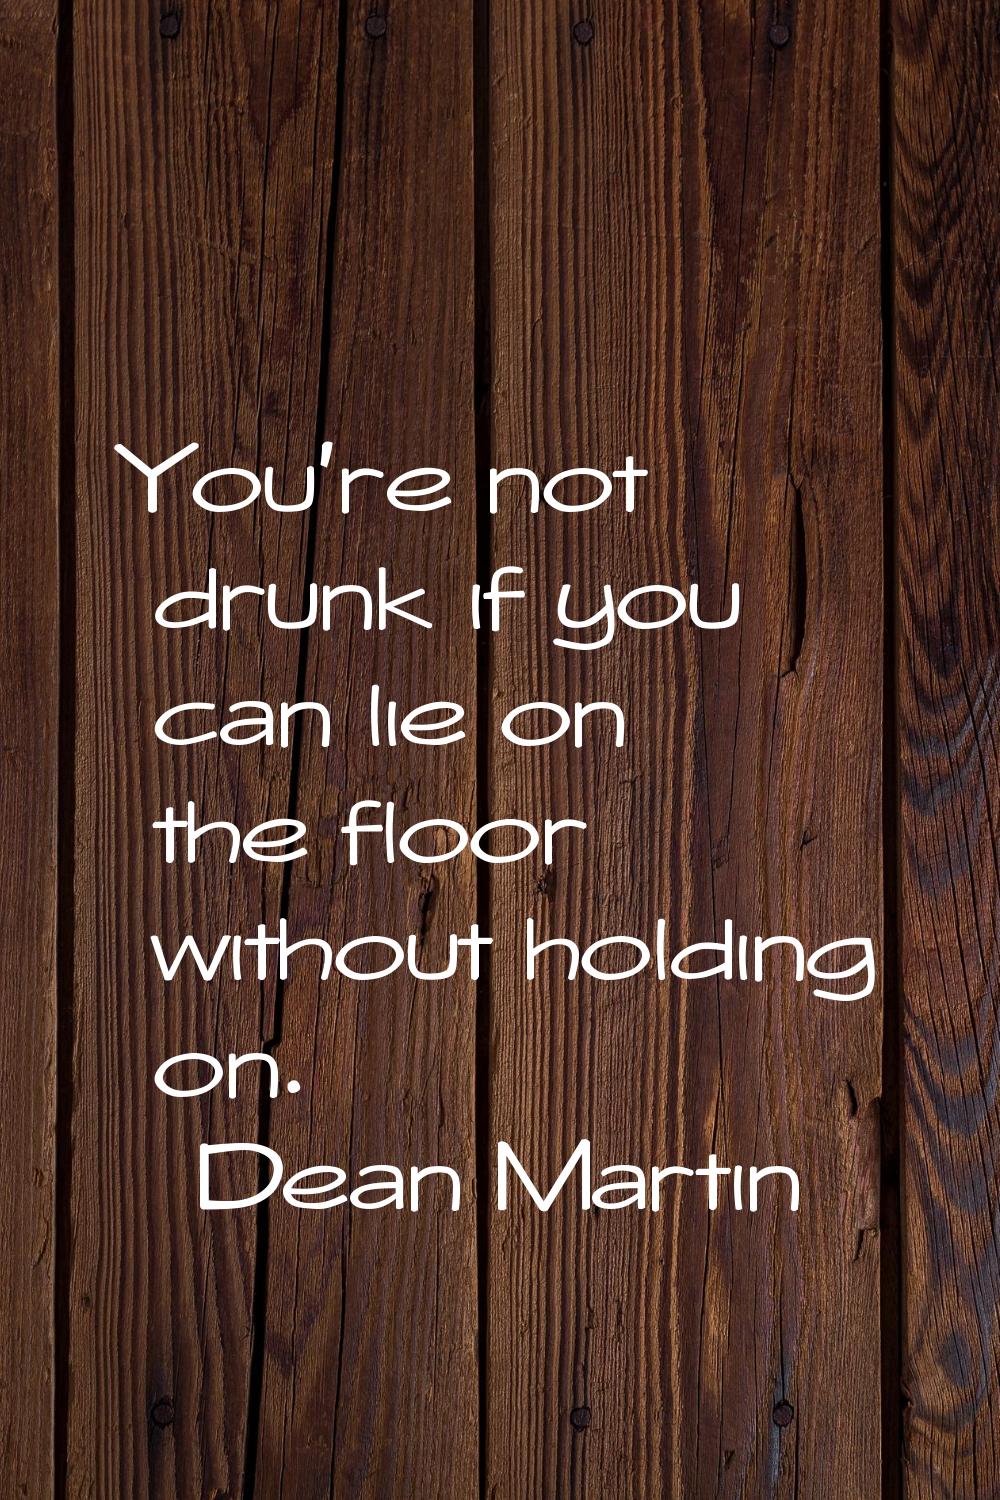 You're not drunk if you can lie on the floor without holding on.